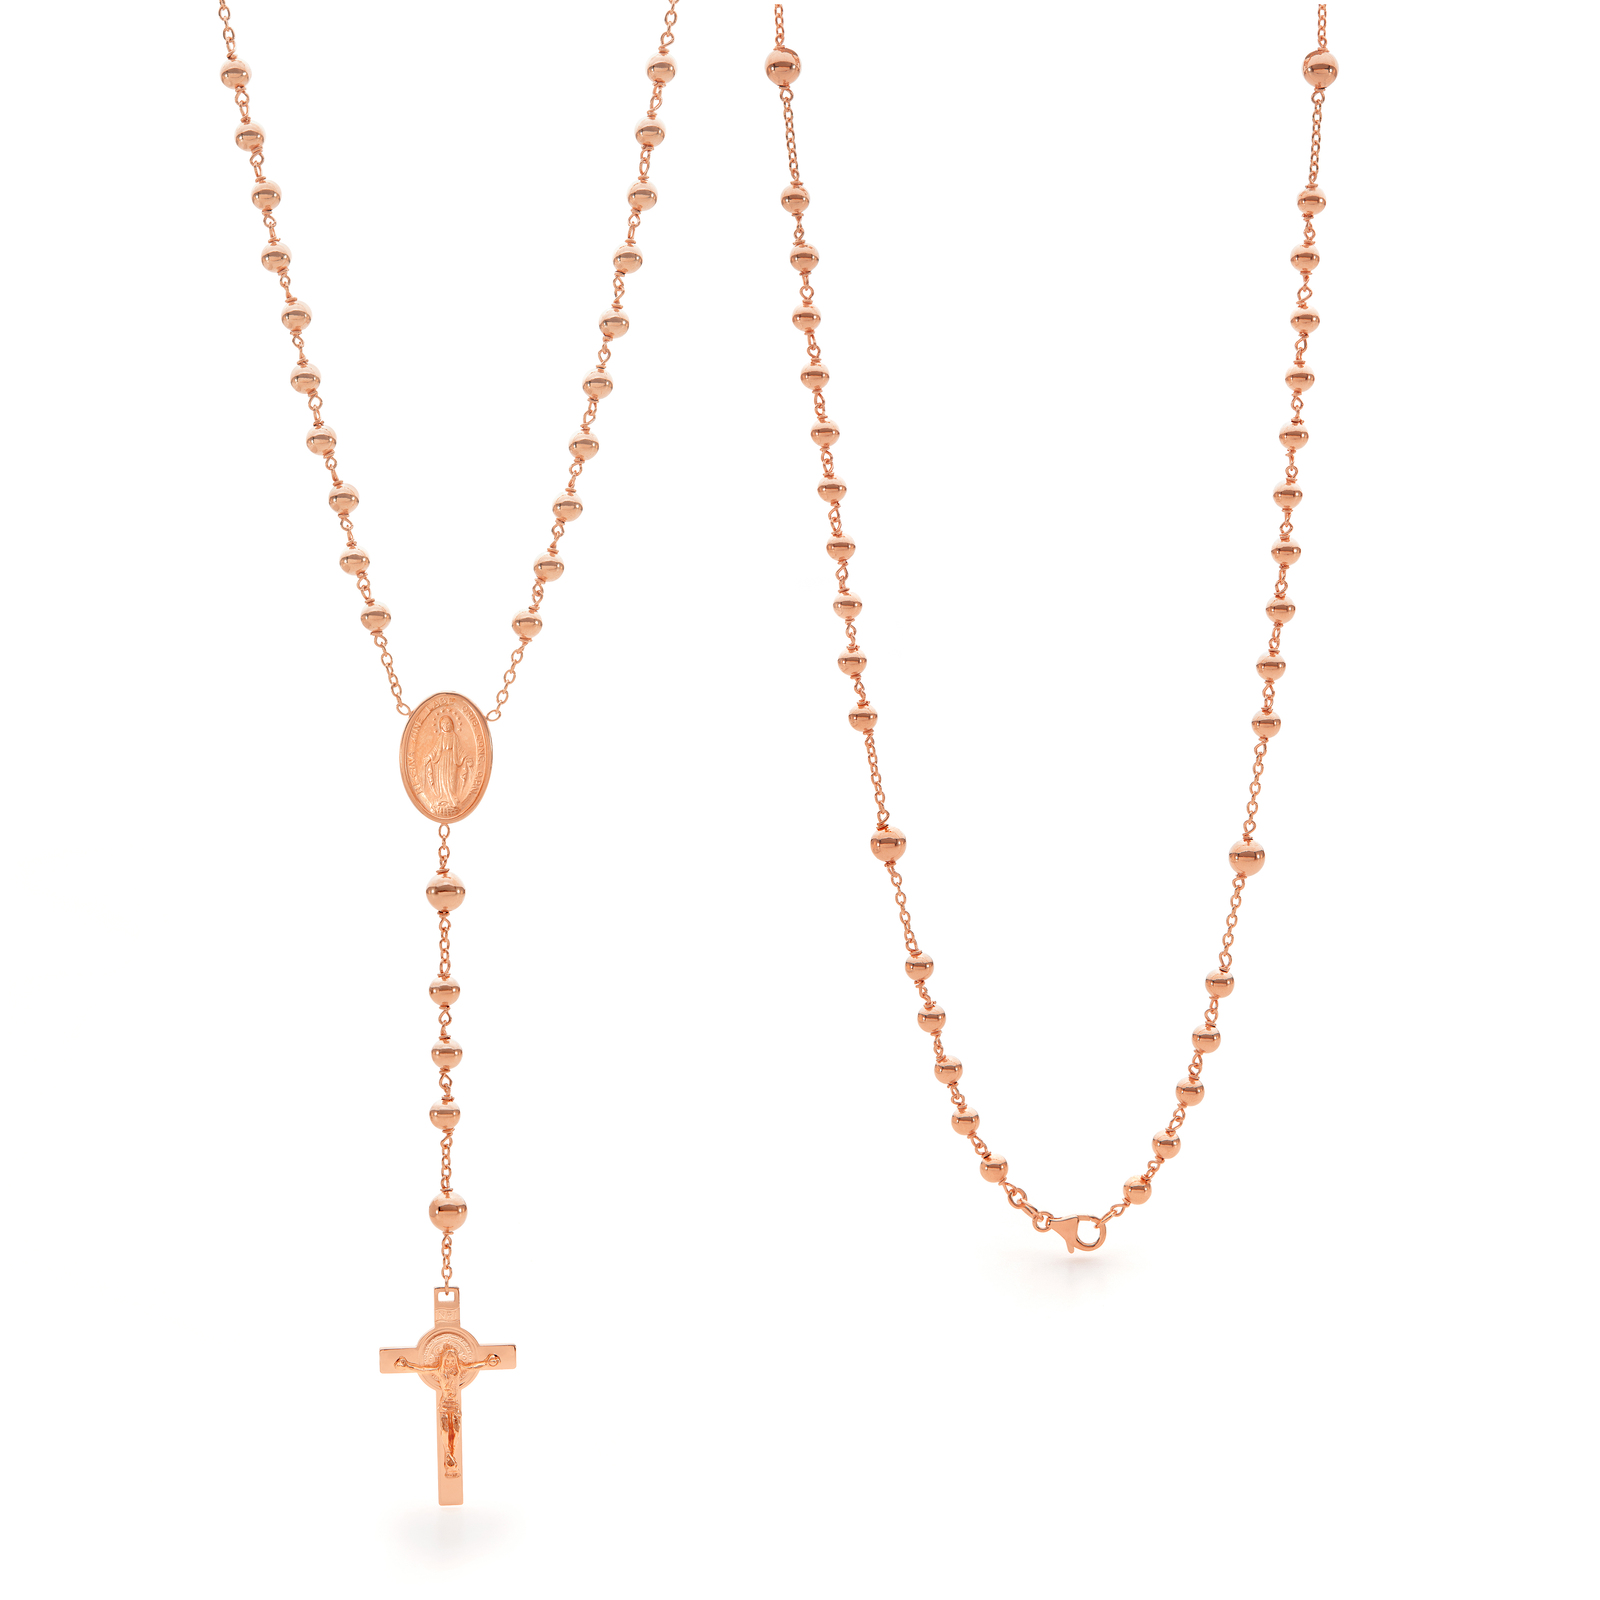 Gold Plated Stainless Steel Rosary Necklace With Cross Pendant Beaded Chain  For Men And Women From Wojia0616, $13.46 | DHgate.Com